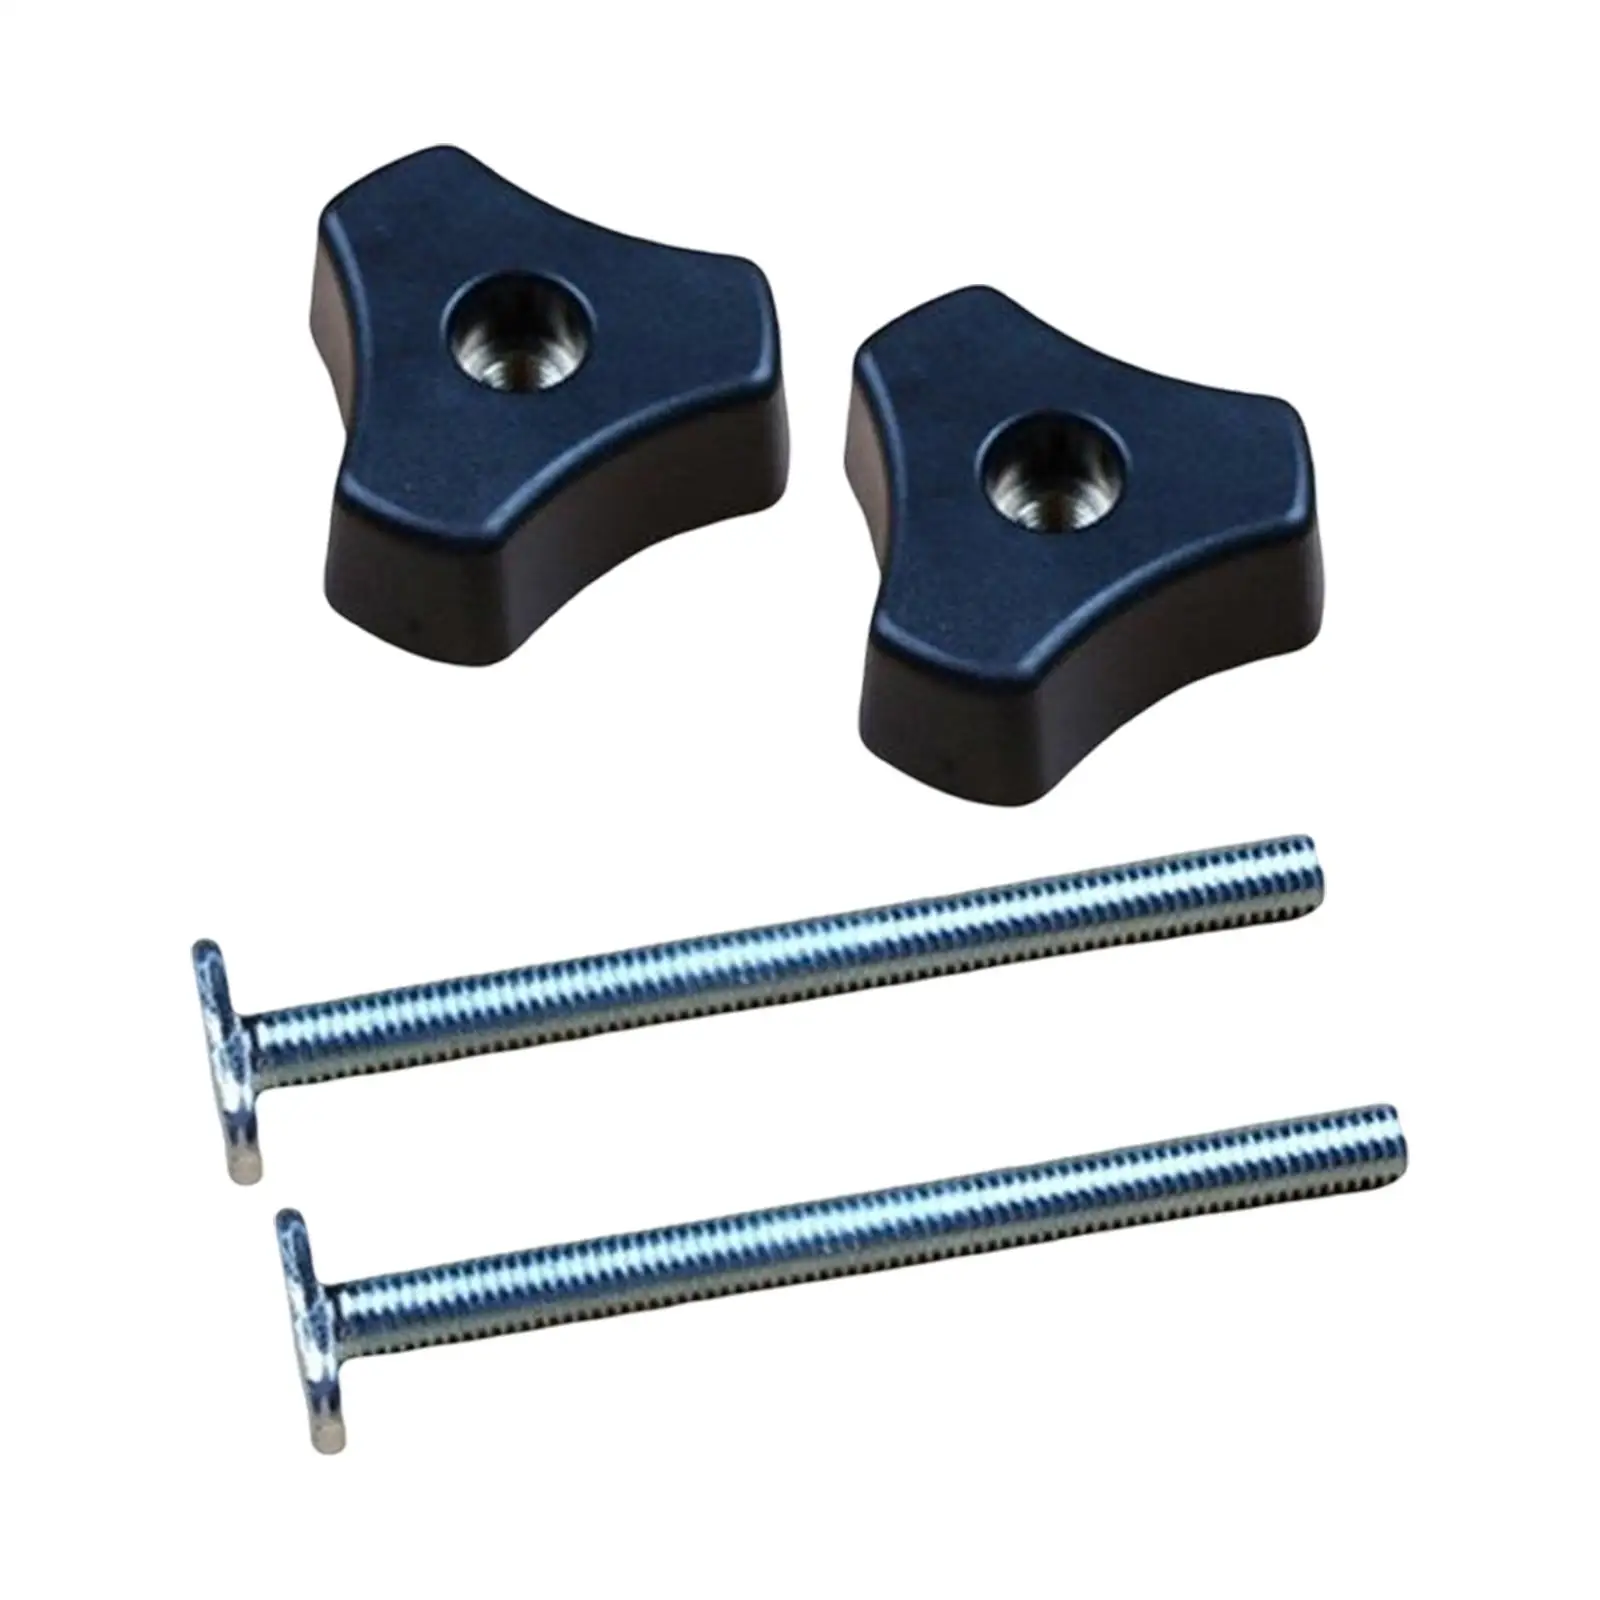 Heavy Duty T Slot Bolts and Knobs Hand Tools Portable Hardware M8 T track for Metalworking Clamping and Positioning